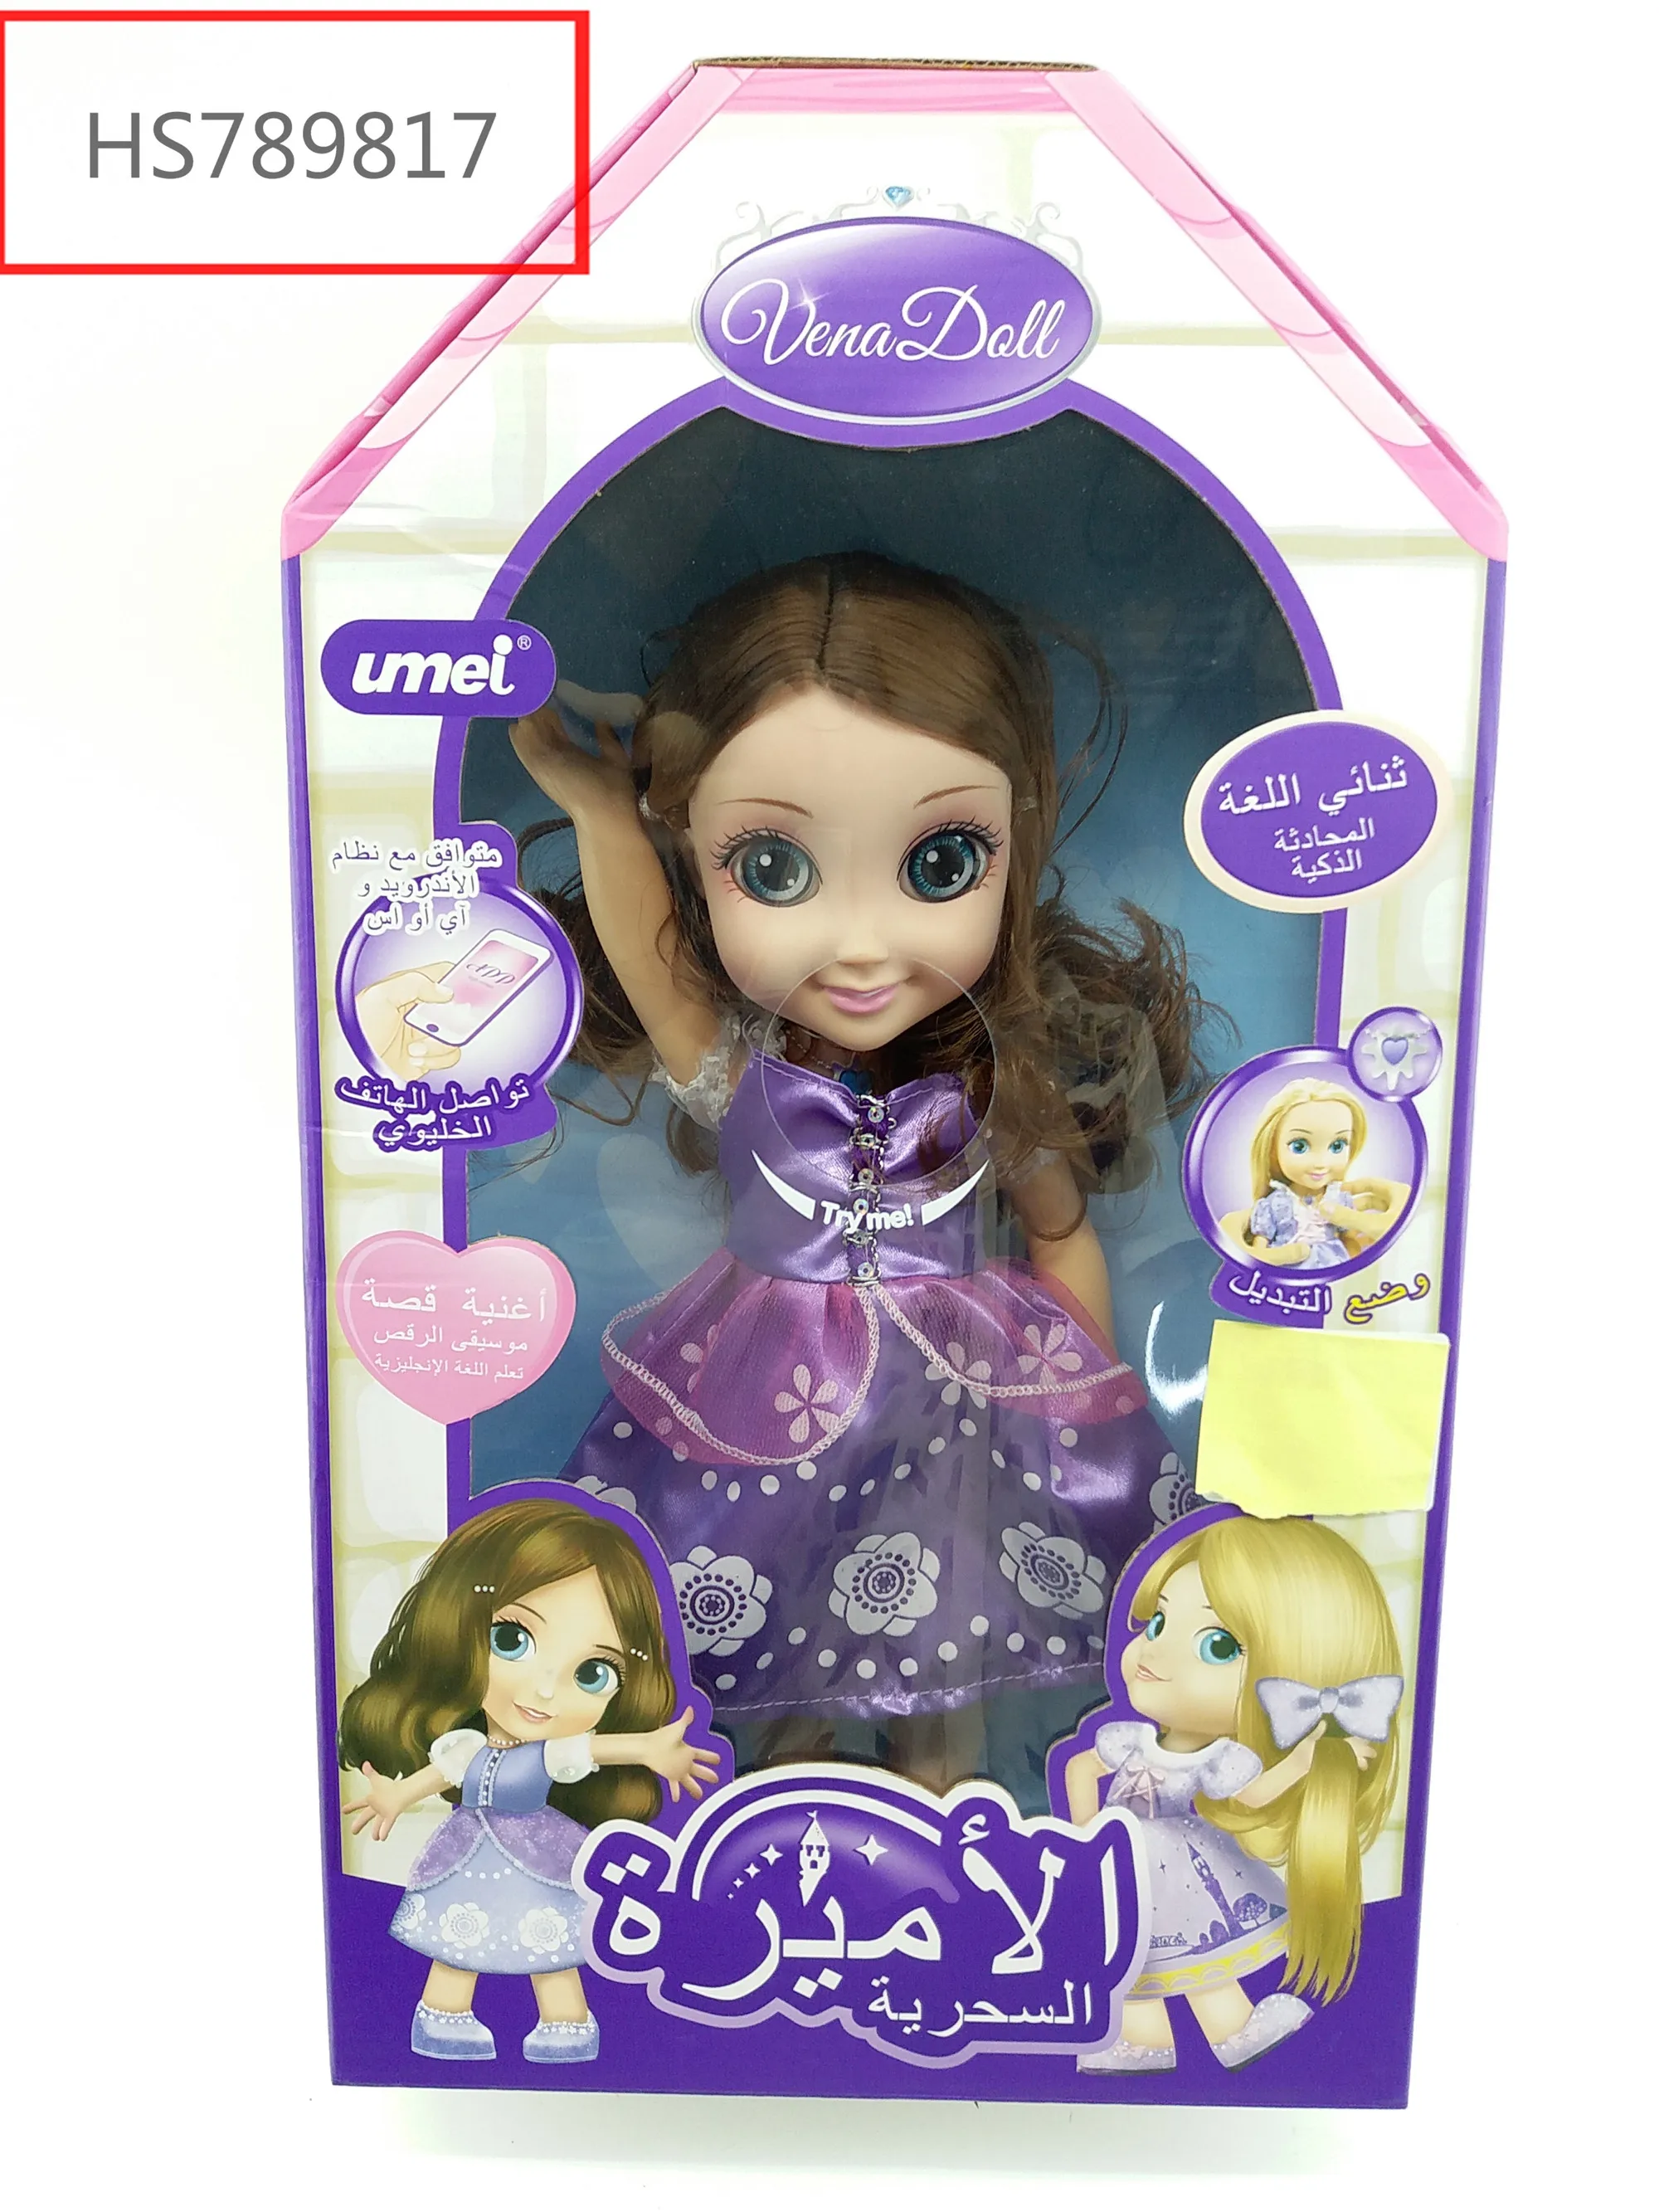 HS789817, Huwsin Toys, Music&storys, Doll